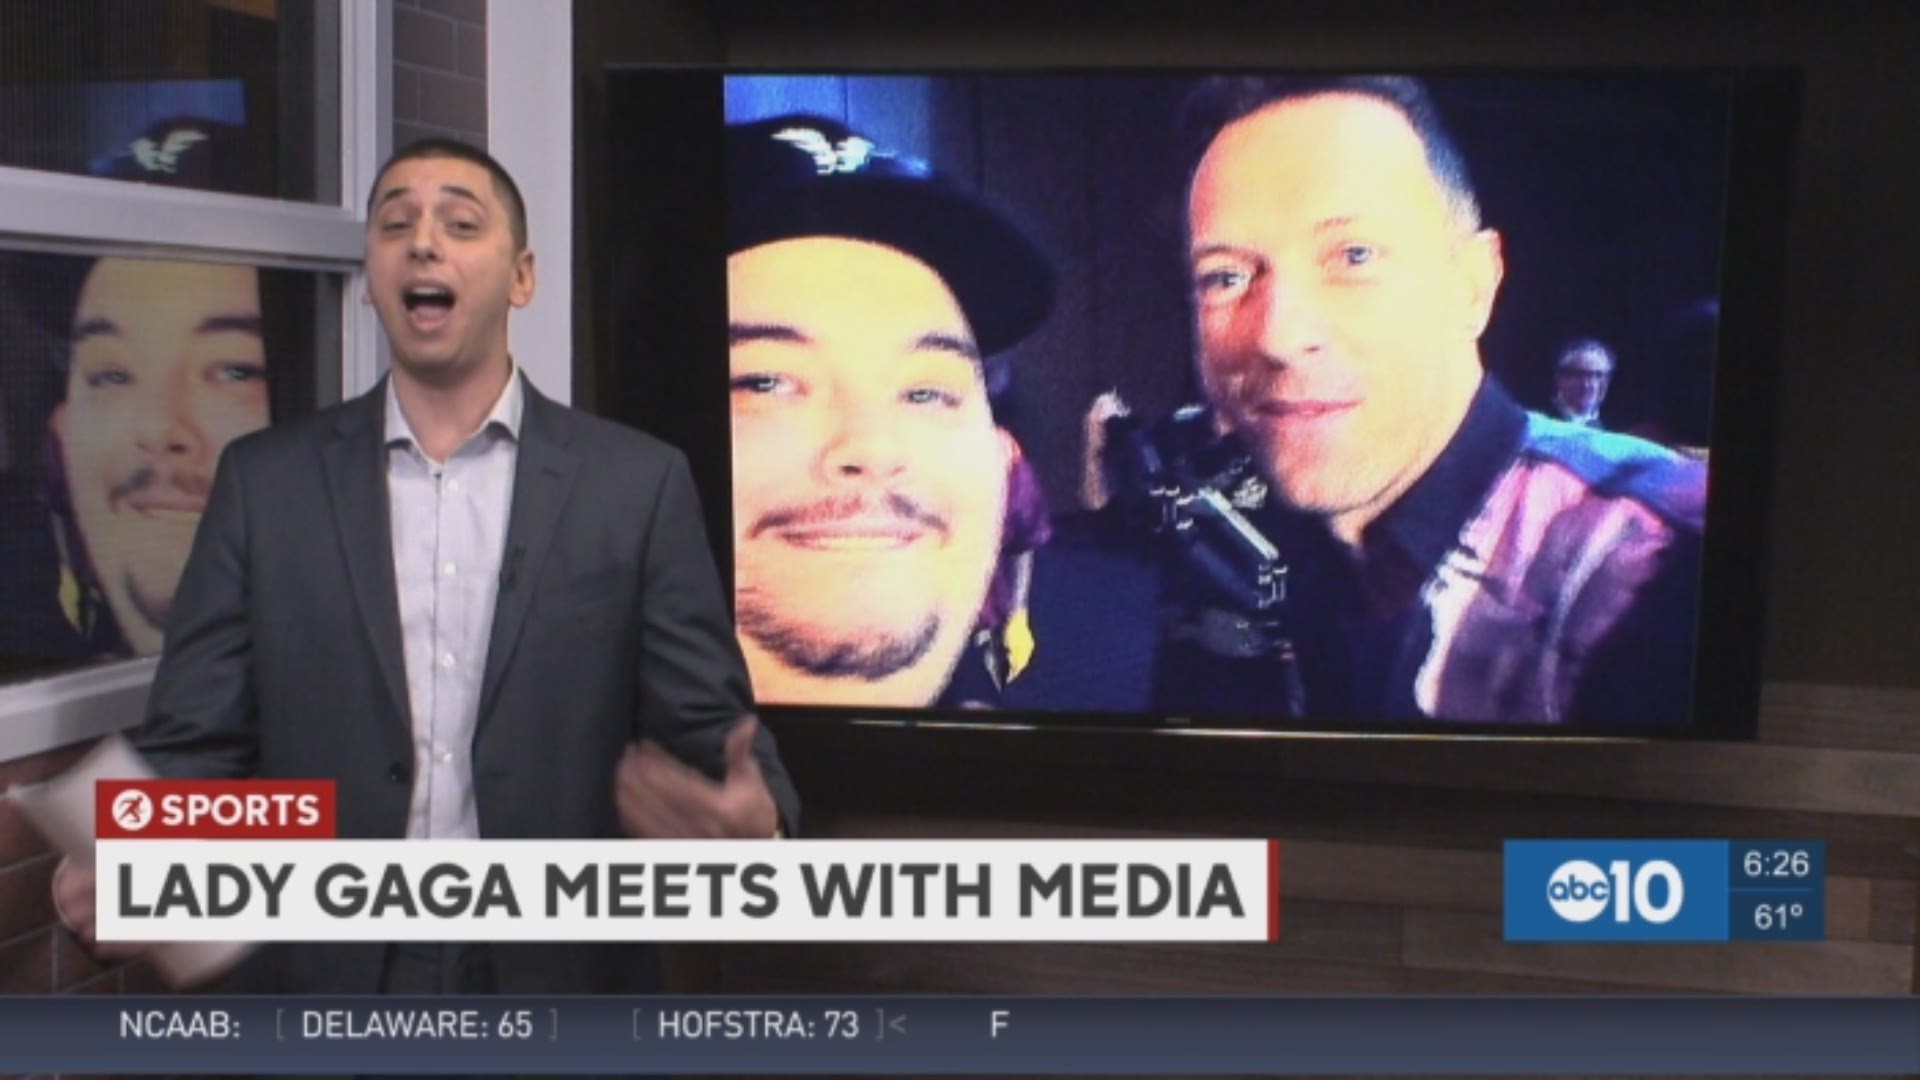 ABC10's Pierre Noujaim has always dreamed of meeting Lady Gaga and while trying to beat out sports producer Sean Cunningham's selfie with last year's Super Bowl halftime performer - Chris Martin of Coldplay - he finally did on Thursday...sort of.